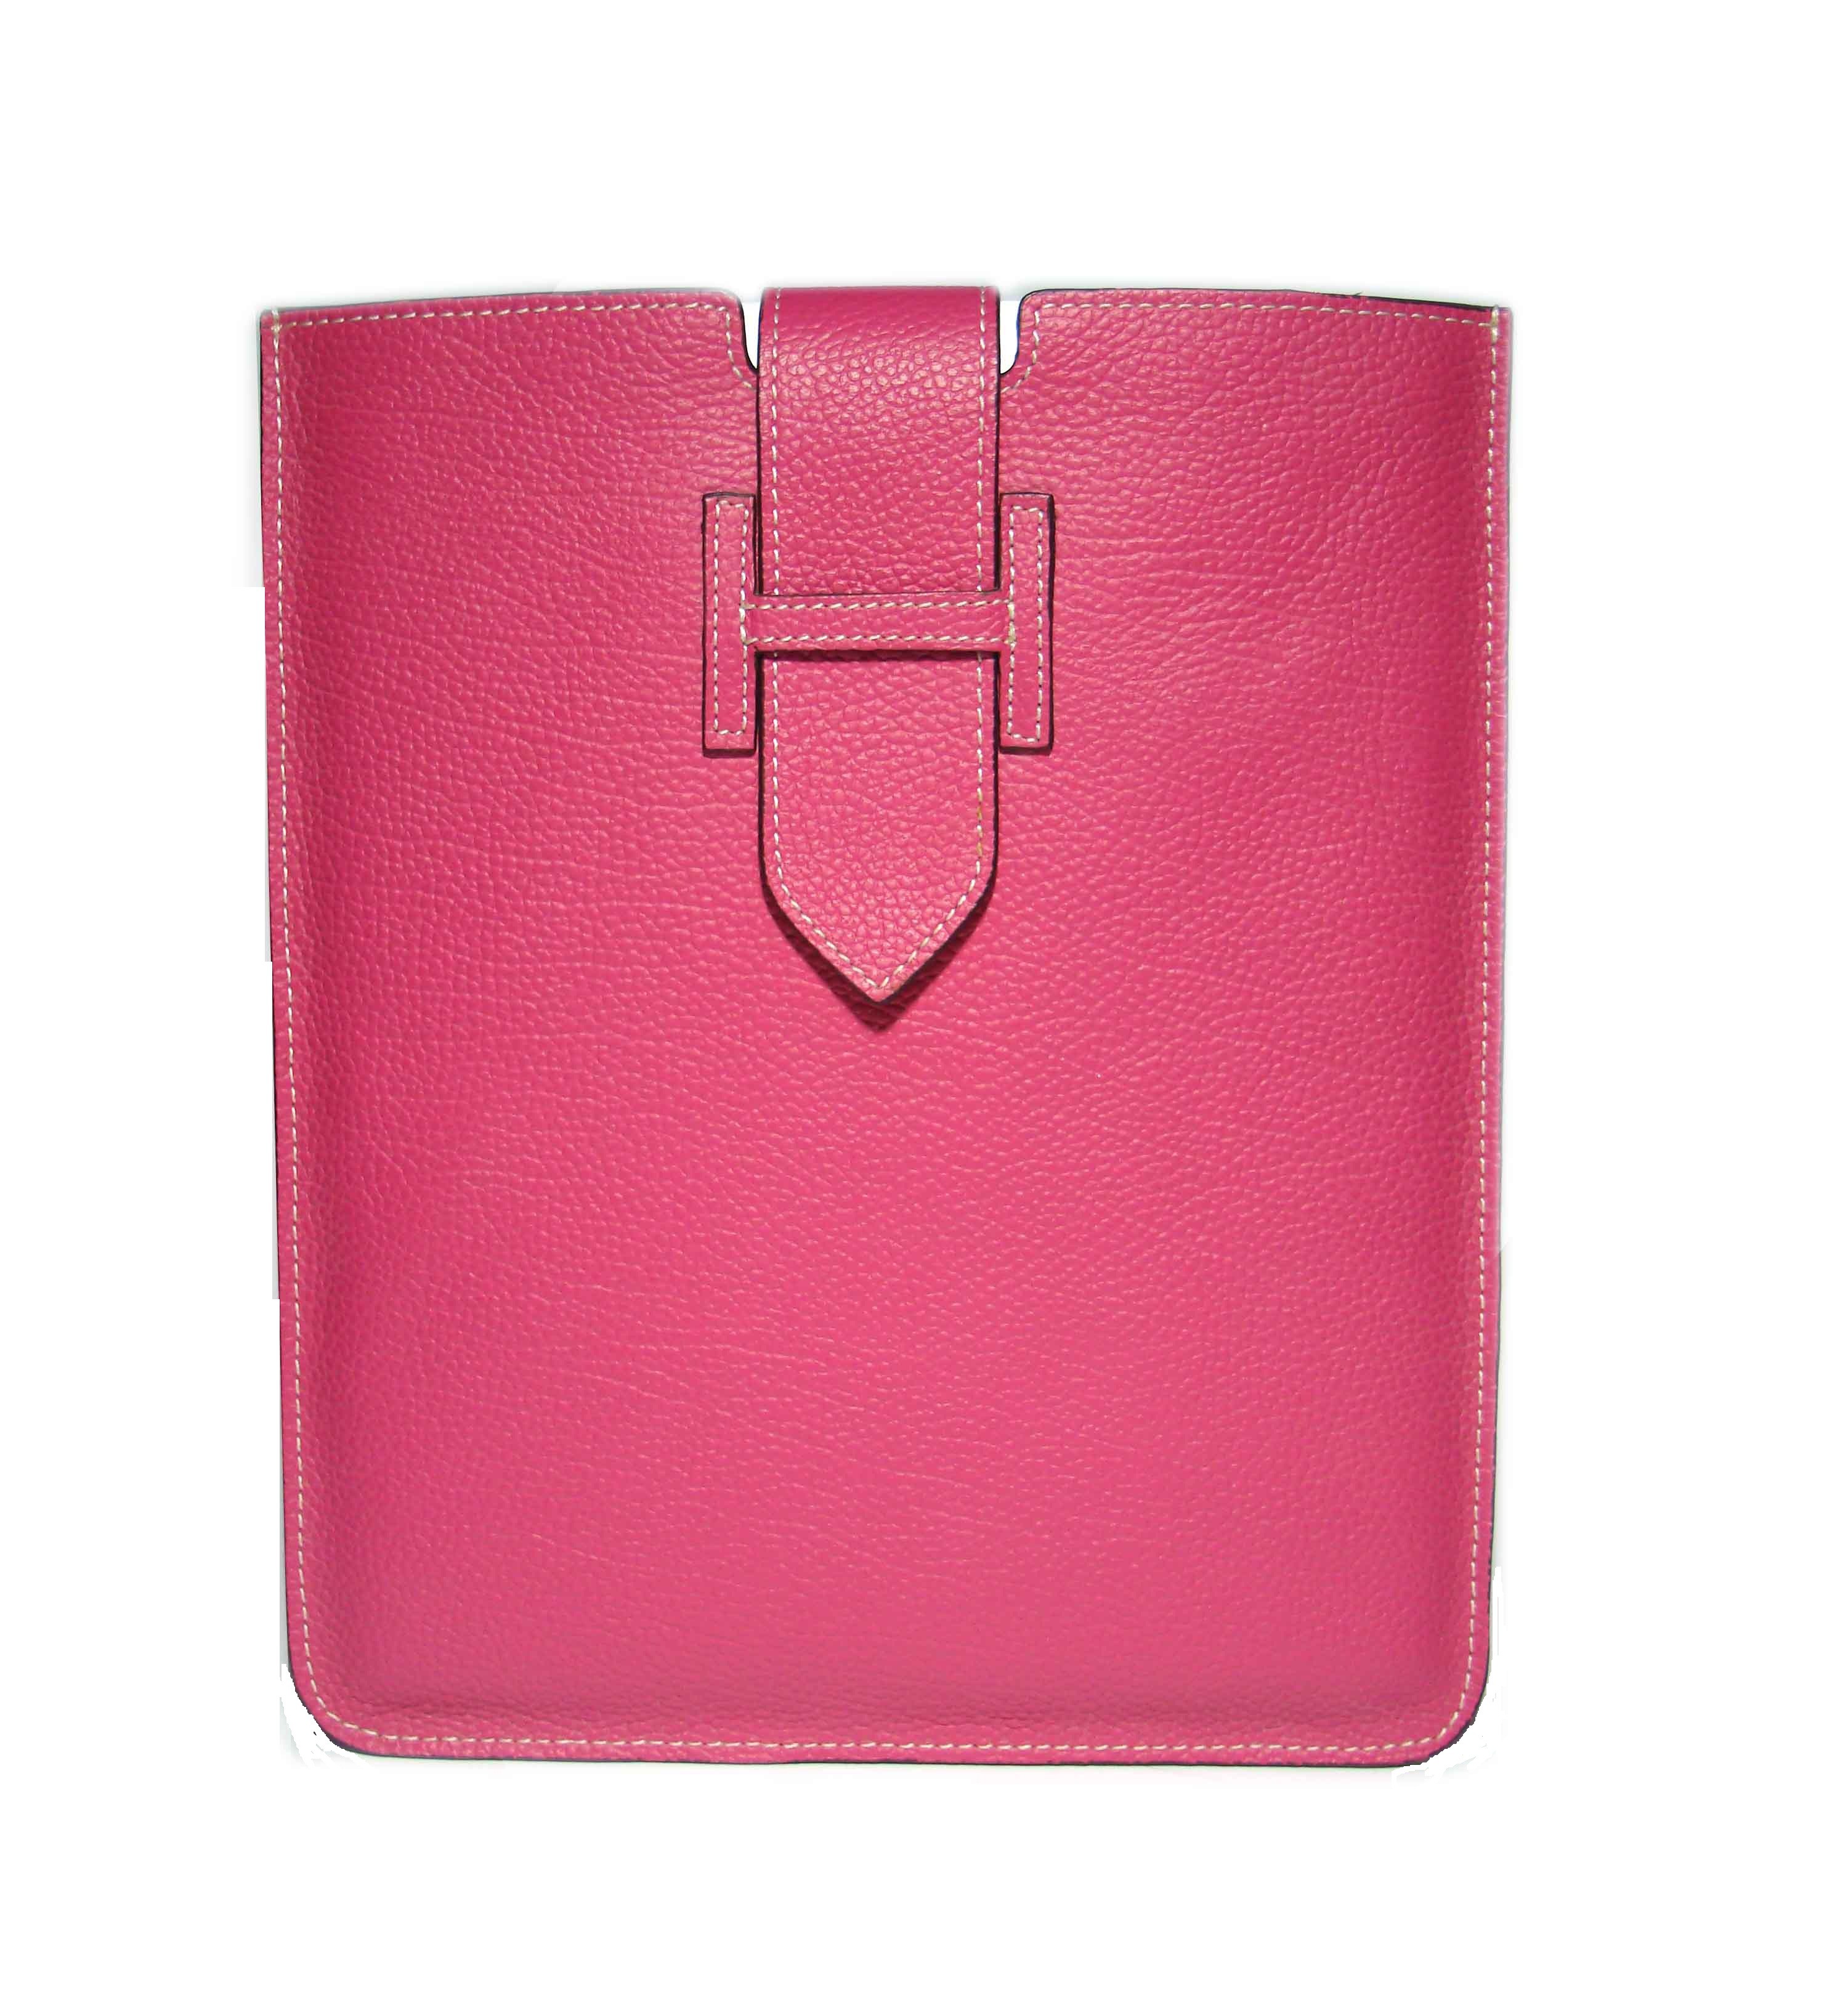 HERMES LIPSTICK iPod Touch 7 Case